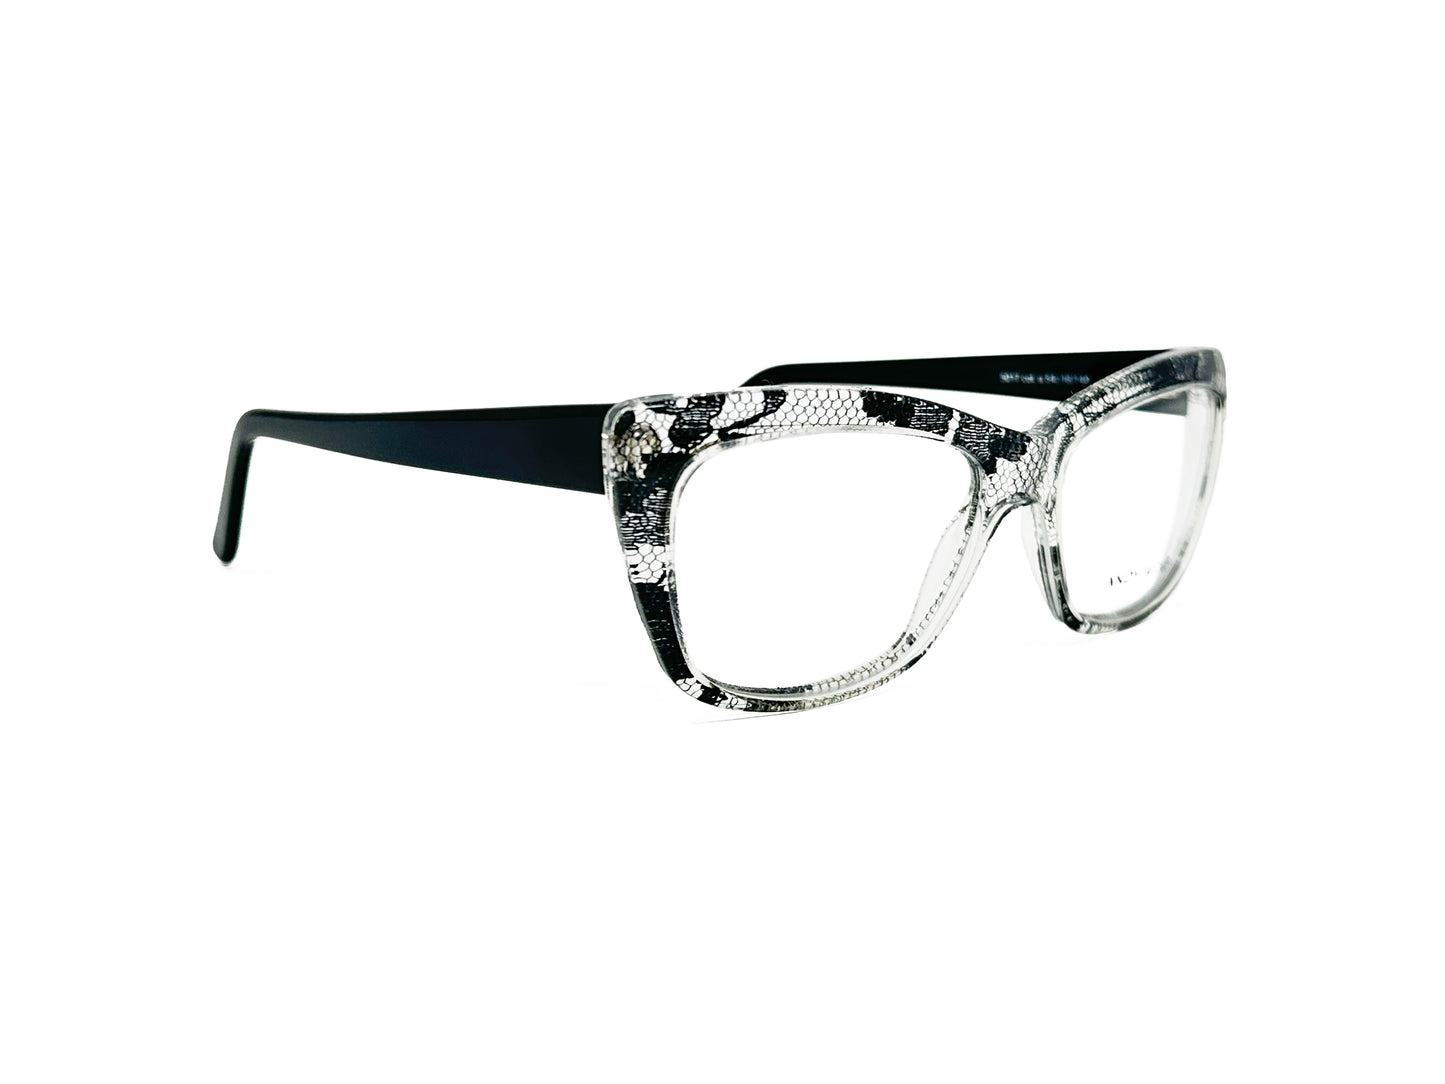 Andy Wolfe acetate, rectangular, cat-eye optical frame. Model: 5017. Color: A - Clear with black snake skin pattern. Side view.